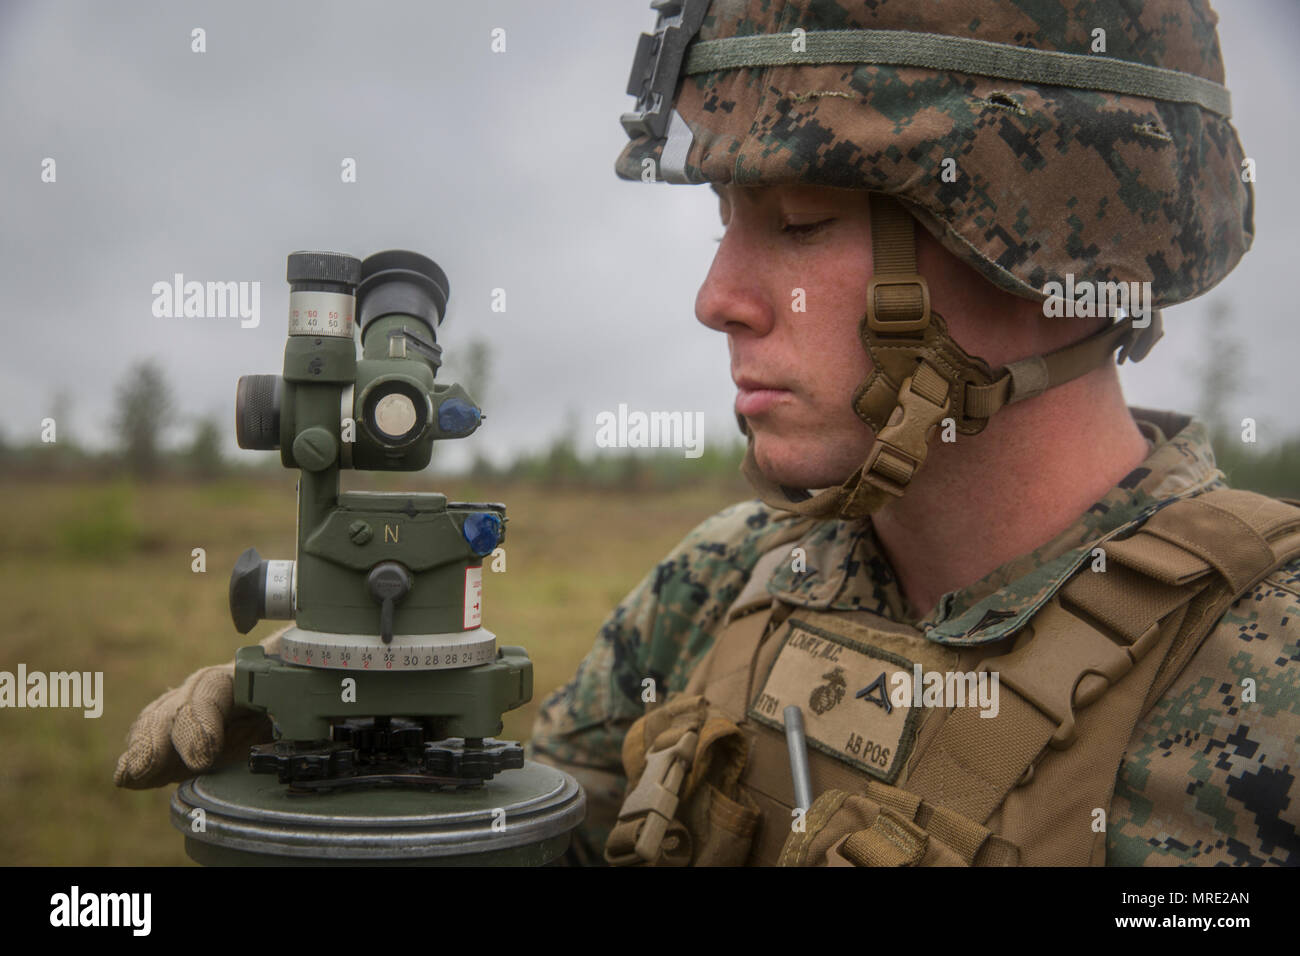 A fire direct controlman with Black Sea Rotational Force 17.1 levels his sight during Exercise Saber Strike 17 aboard Adazi Military Base, Latvia, June 5, 2017. The exercise is a multinational training evolution designed to increase interoperability between NATO allies and partner nations through combined-arms training. (U.S. Marine Corps photo by Sgt. Patricia A. Morris) Stock Photo